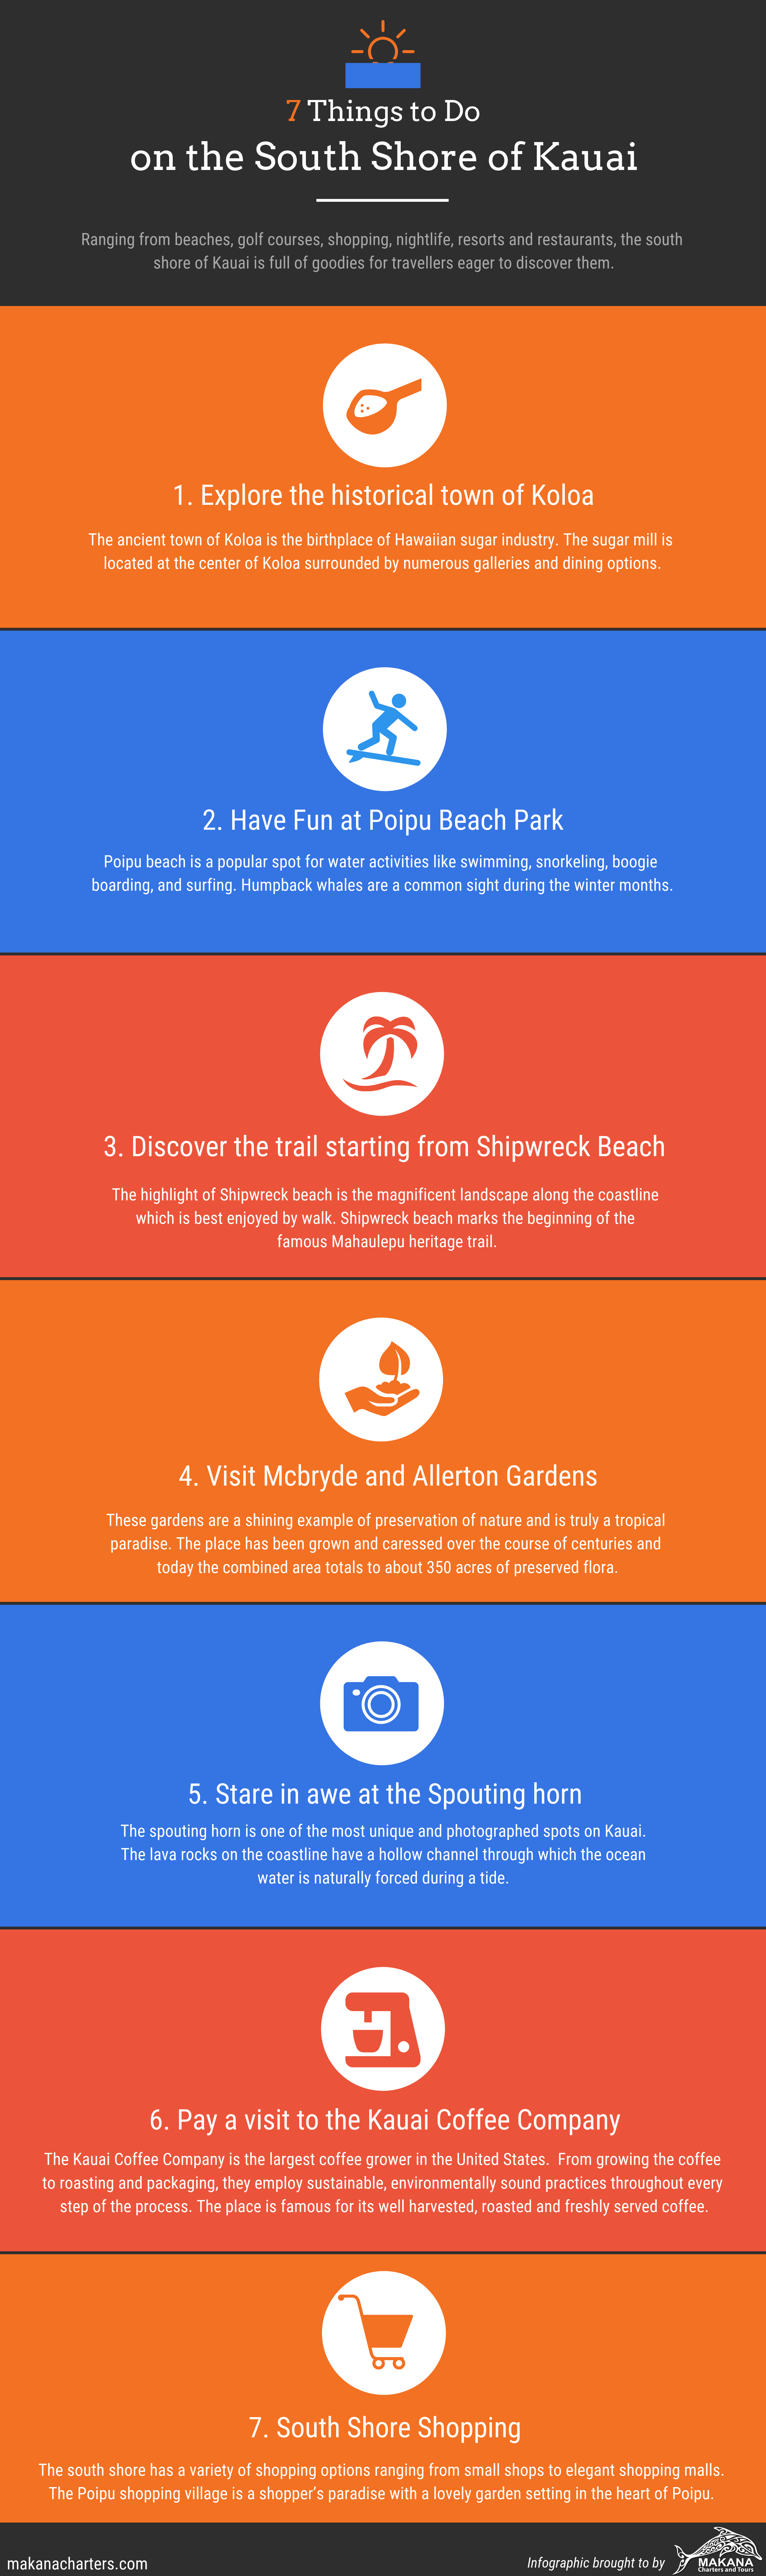 Things to do on South Shore of Kauai - Infographic